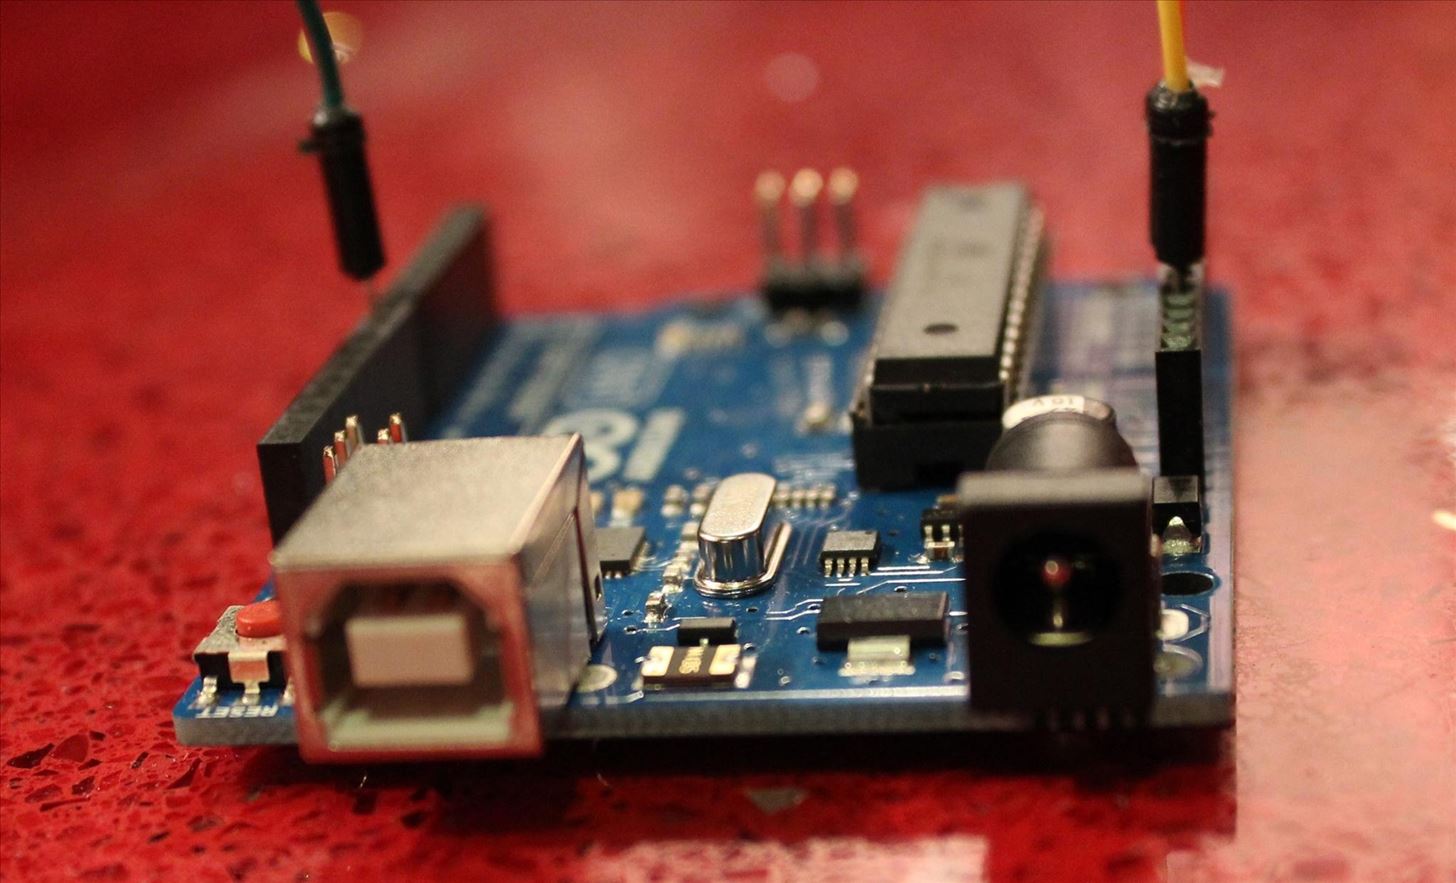 How to Get Started with Arduinos—For People Who Literally Know Nothing About Electronics